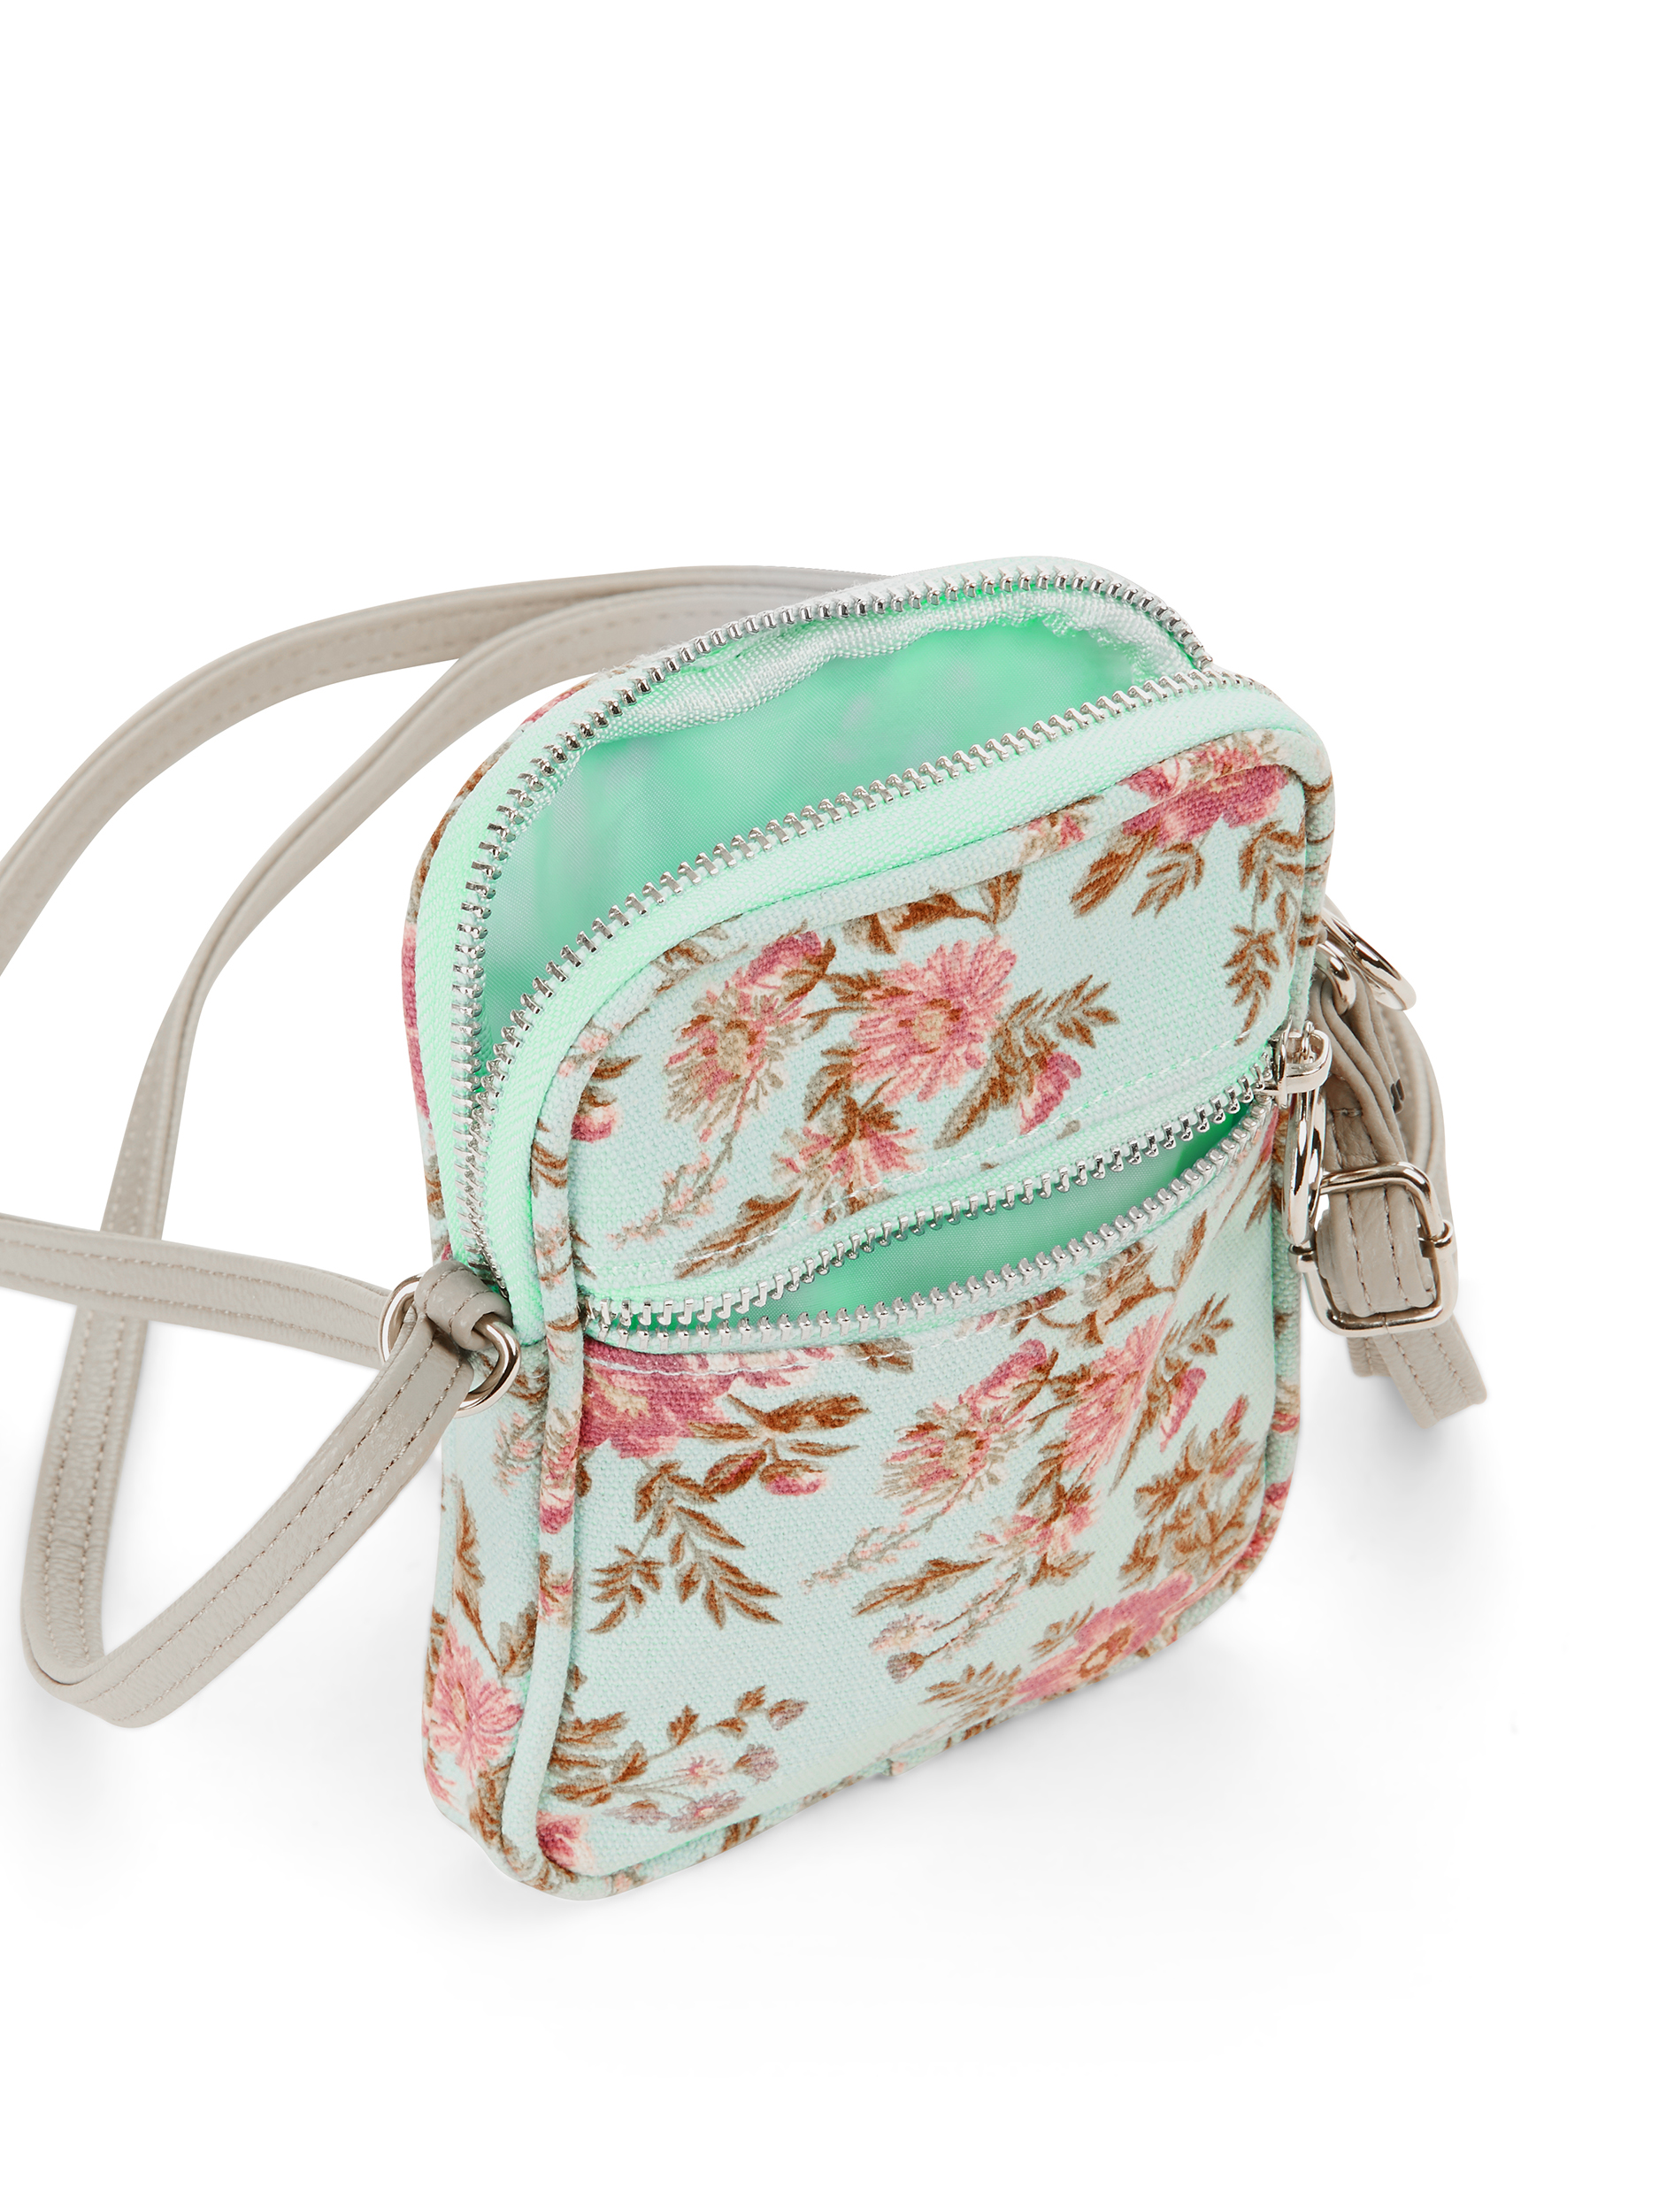 No Boundaries Mint Floral Cell Phone Crossbody - image 3 of 3